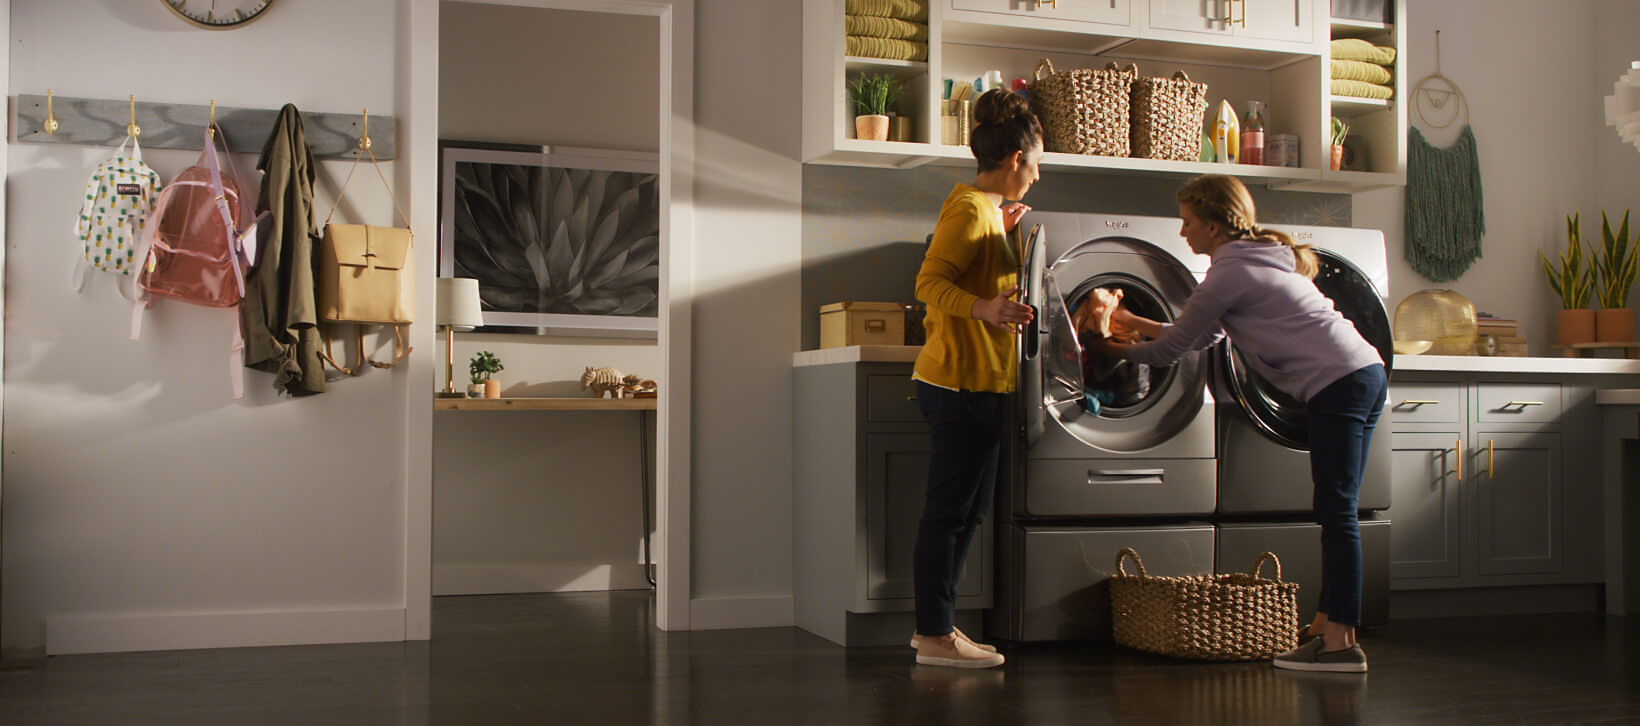 Young girl loading a washing machine in the laundry room while talking with her mother.